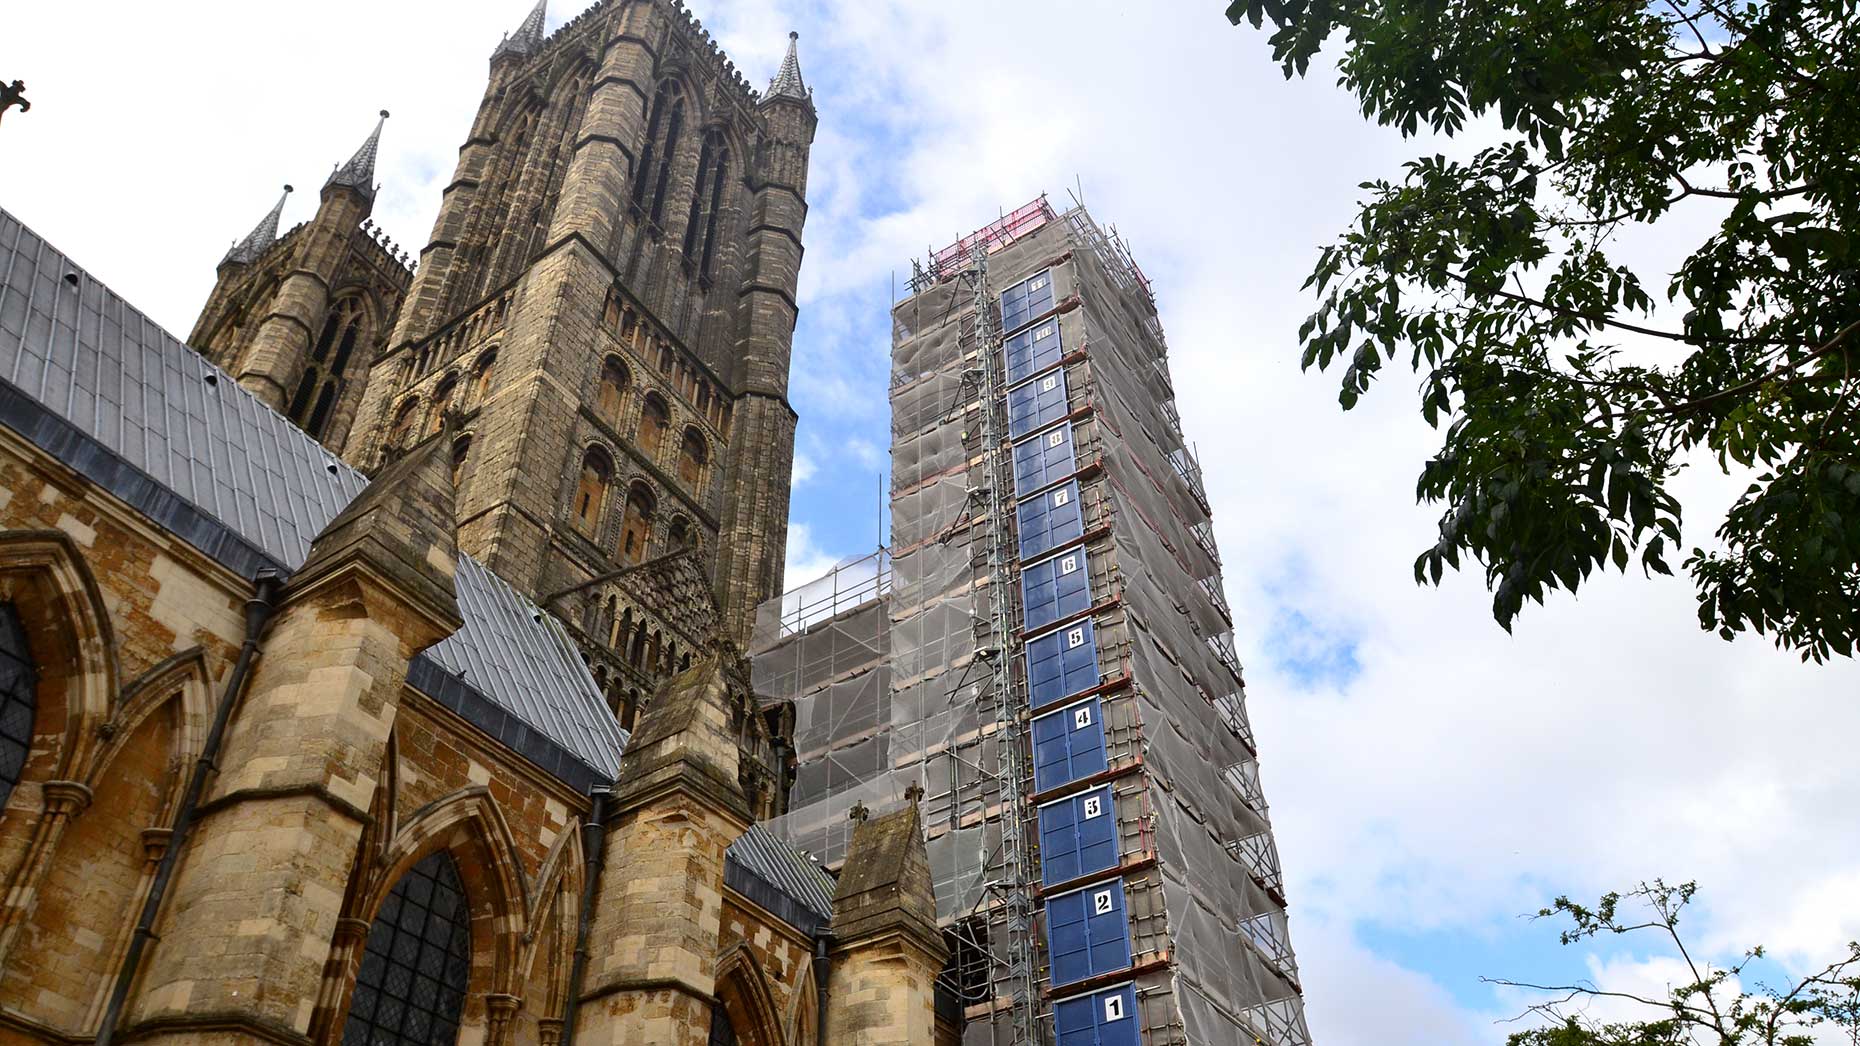 Works on the North West Tower. Photo: Steve Smailes for The Lincolnite